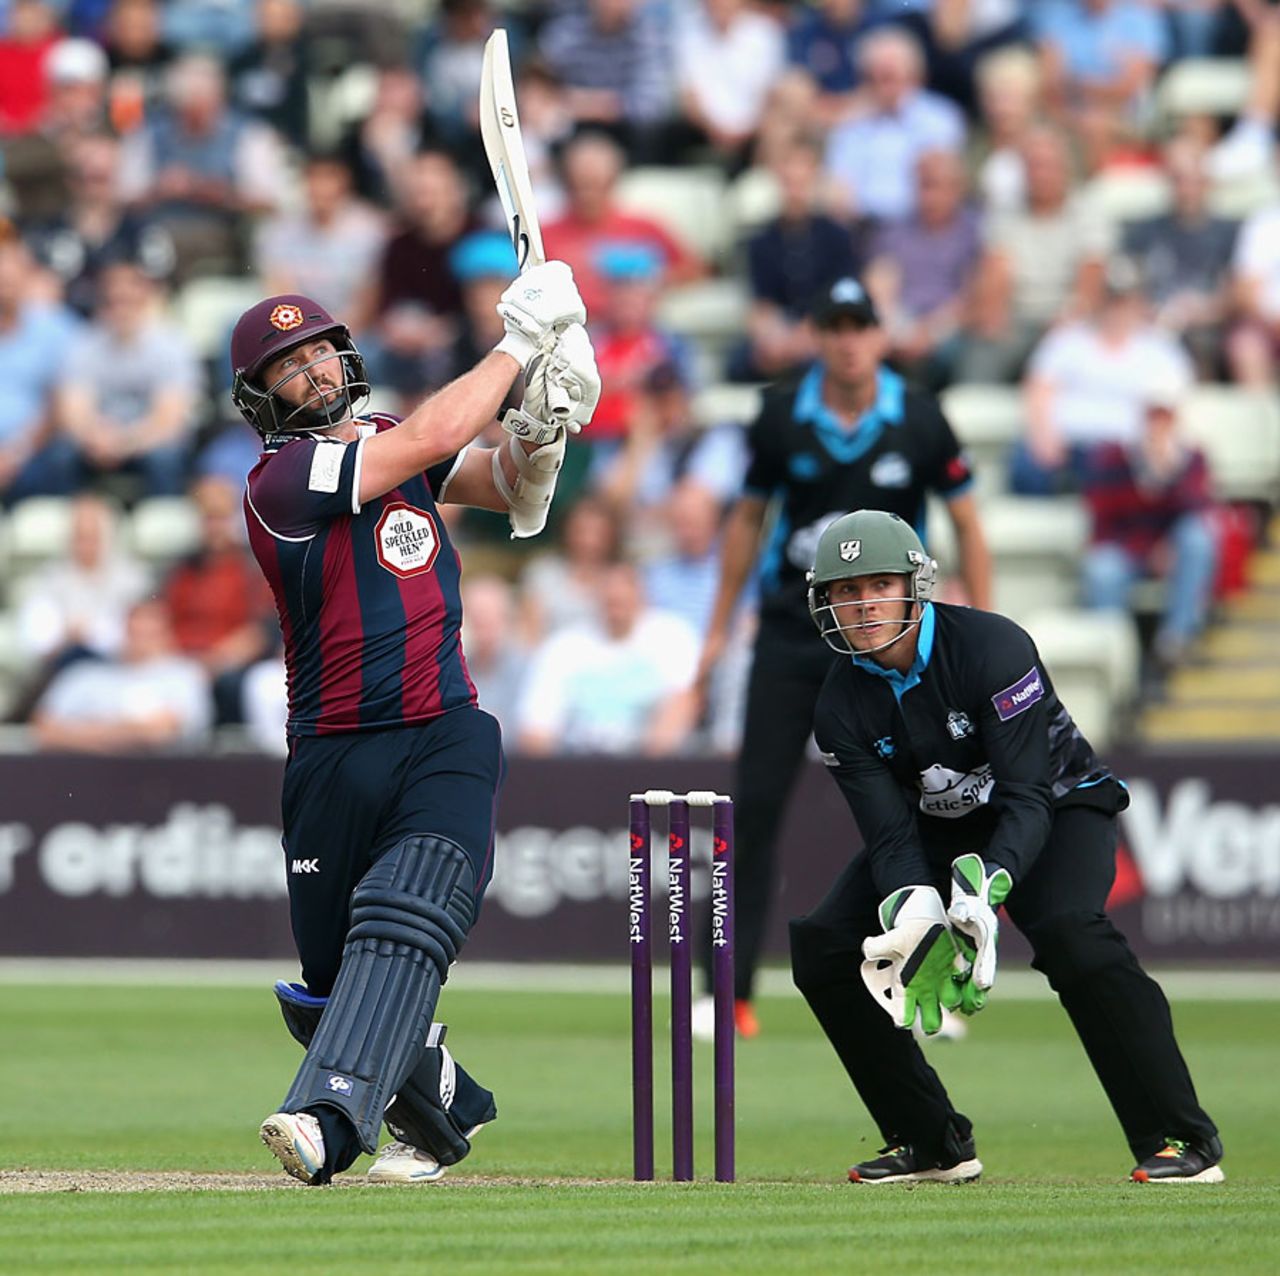 Steven Crook helped revive Northamptonshire with 56 off 35 balls, Worcestershire v Northamptonshire, NatWest T20 Blast, North Group, New Road, June 26, 2015